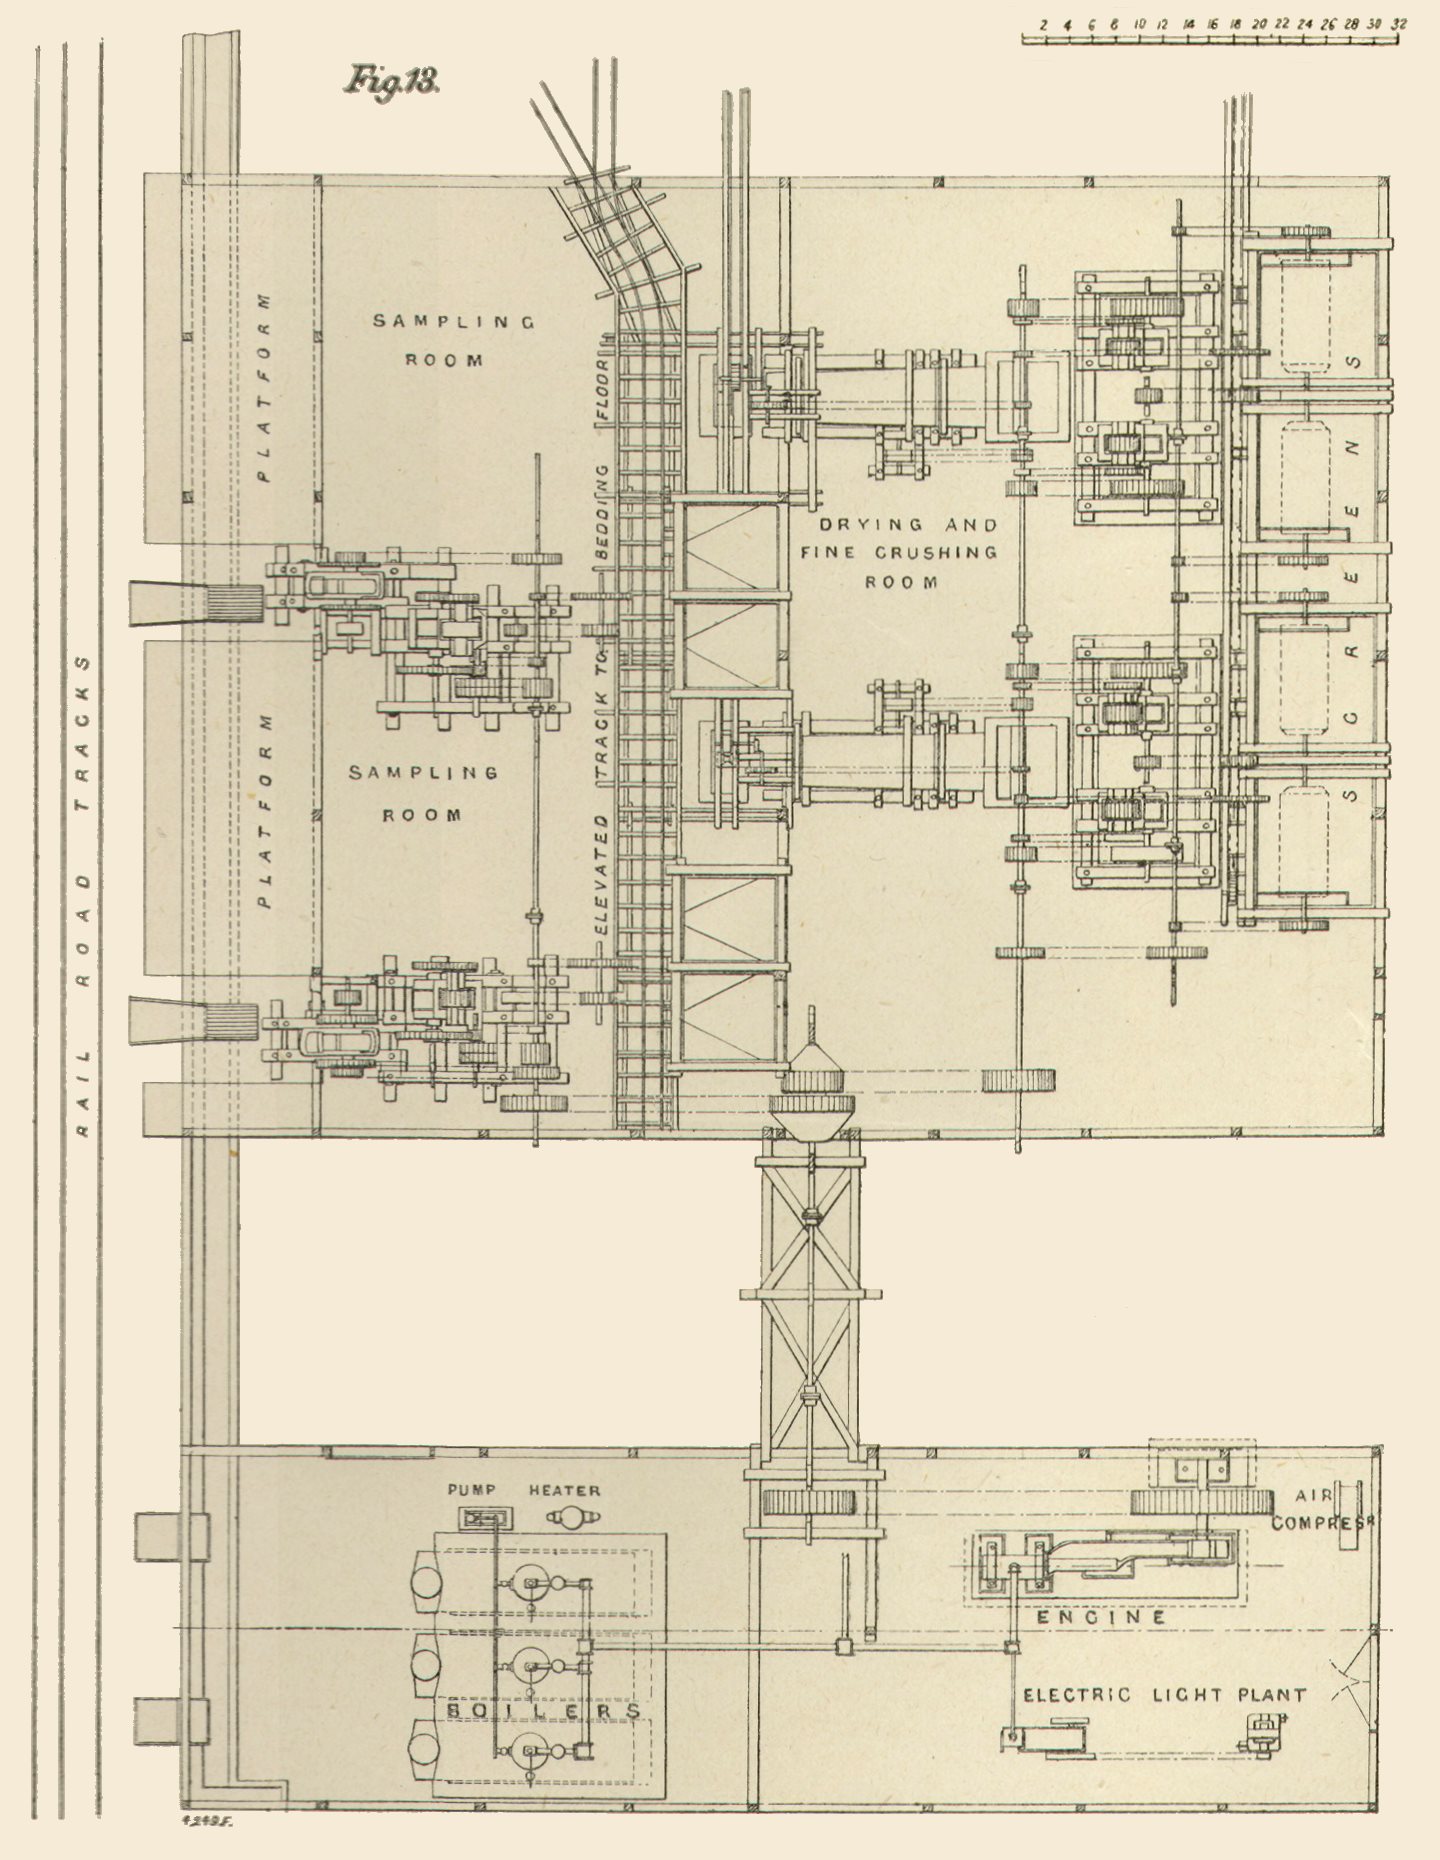 Floorplan of Crusher Building & Power Plant Structure